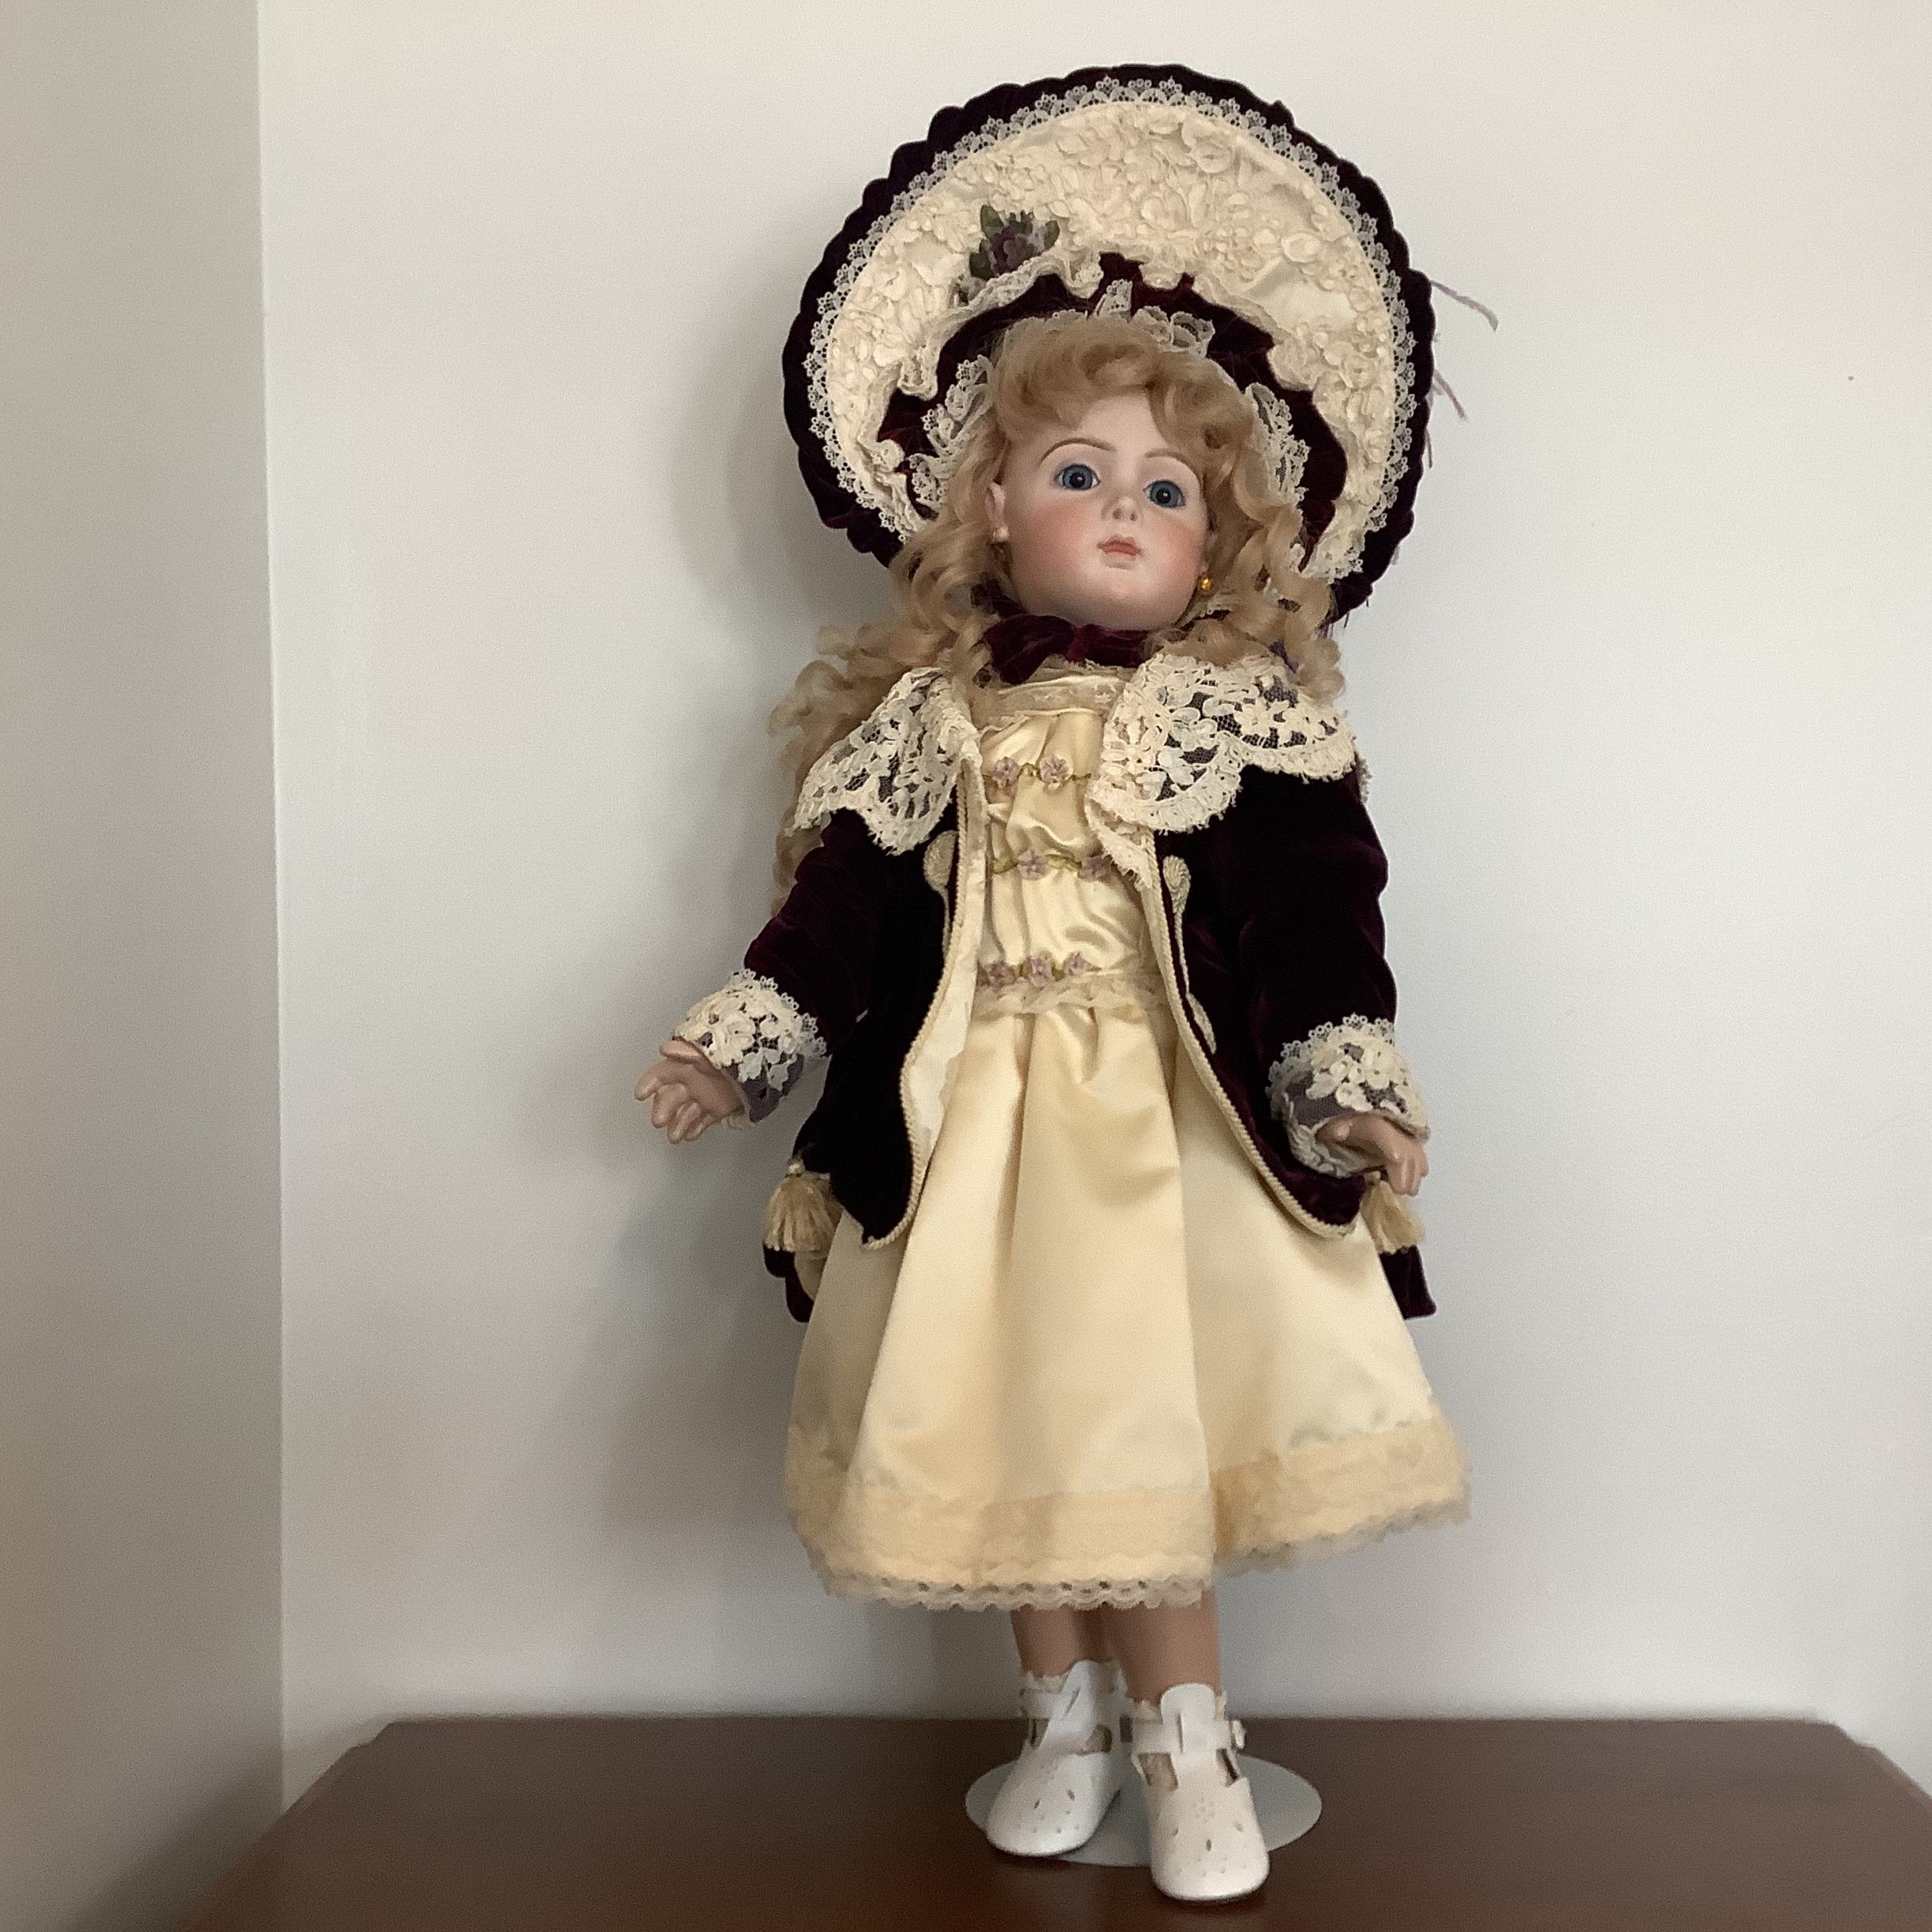 Reproduction Cody Jumeau doll in an off-white satin dress and lace-trimmed purple velvet coat and matching hat, with light skin and long, curly blond hair